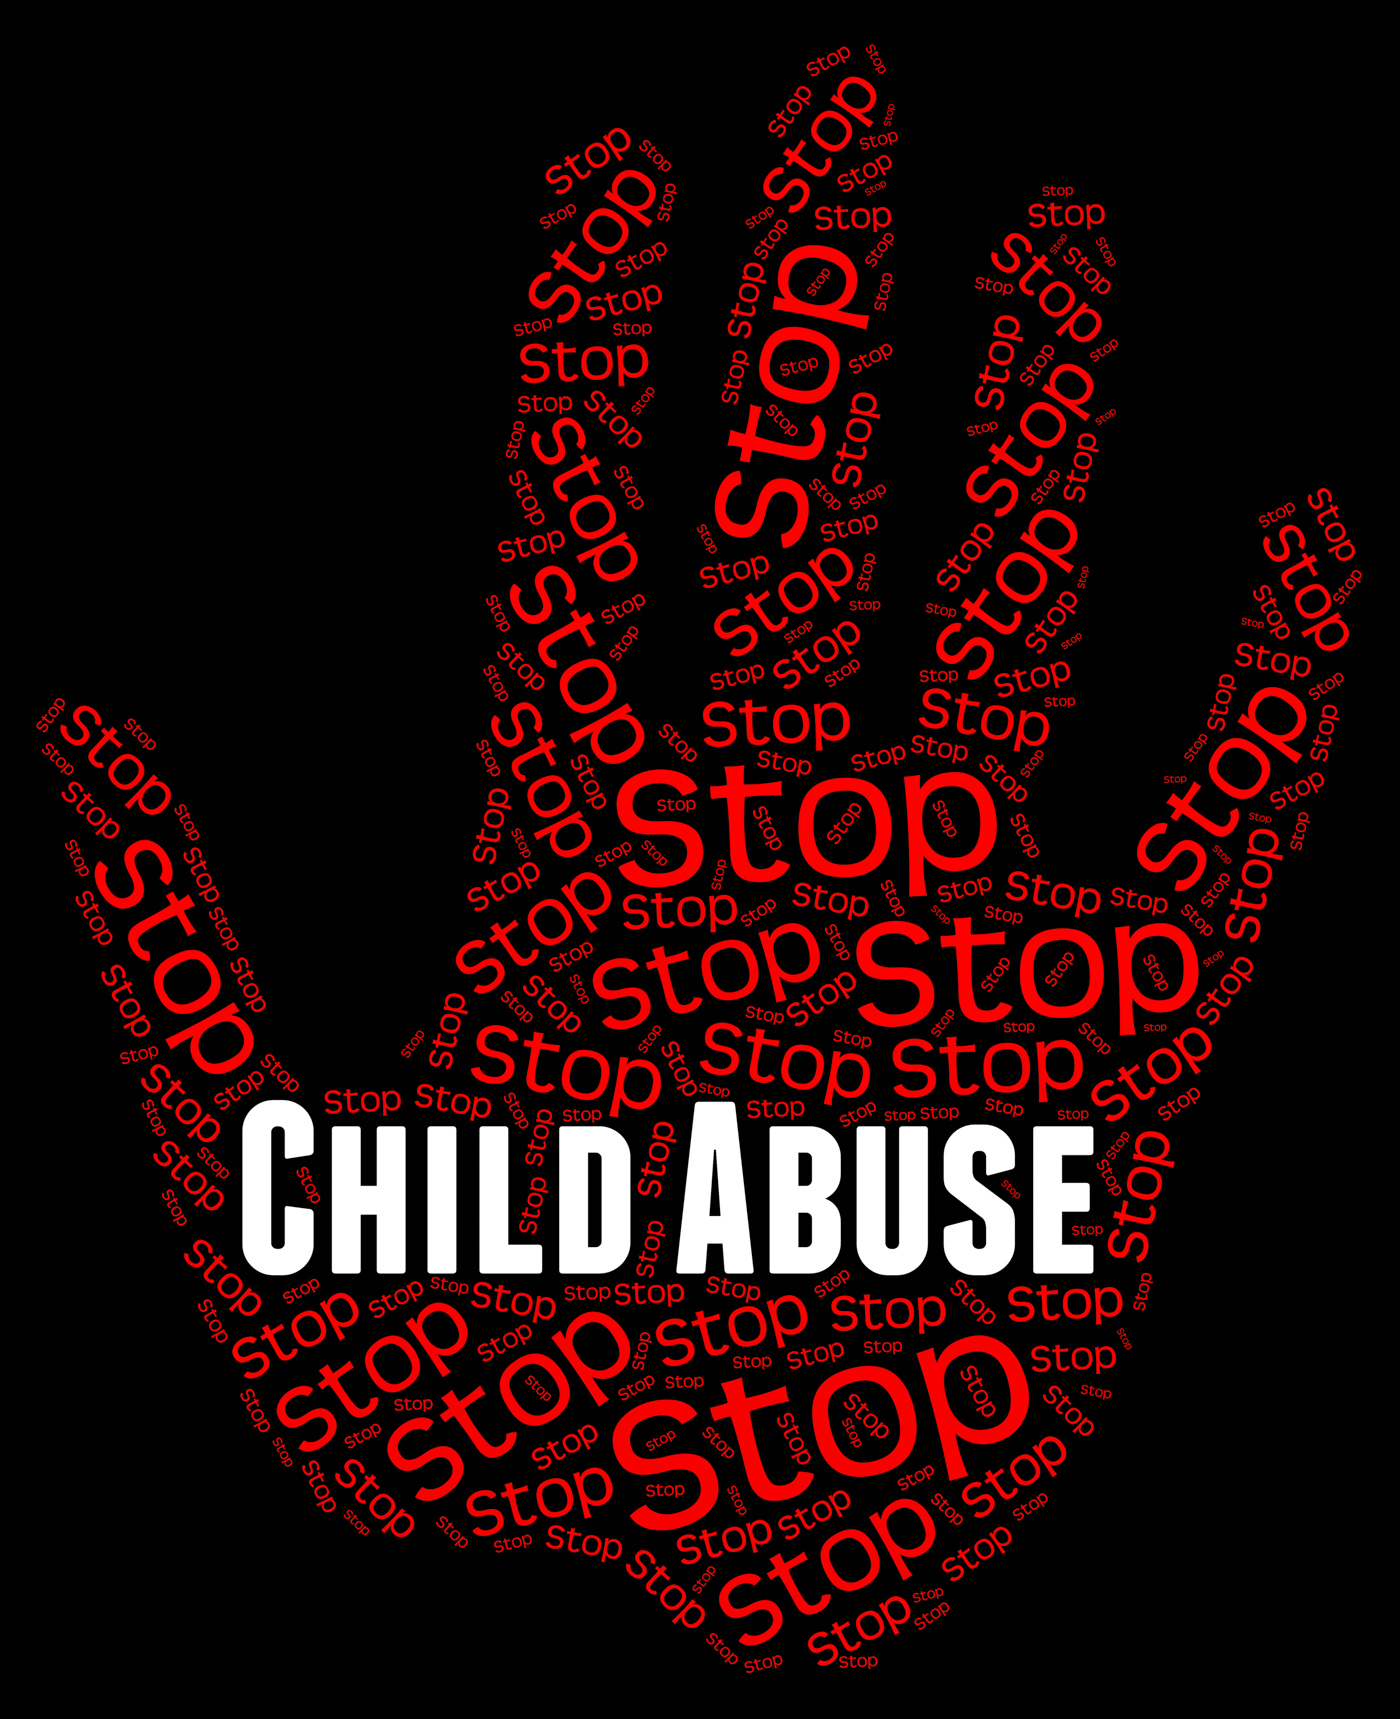 Stop Child Abuse Represents No Childhood And Mistreat, Abuse, Prohibit, Maltreat, Mistreat, HQ Photo